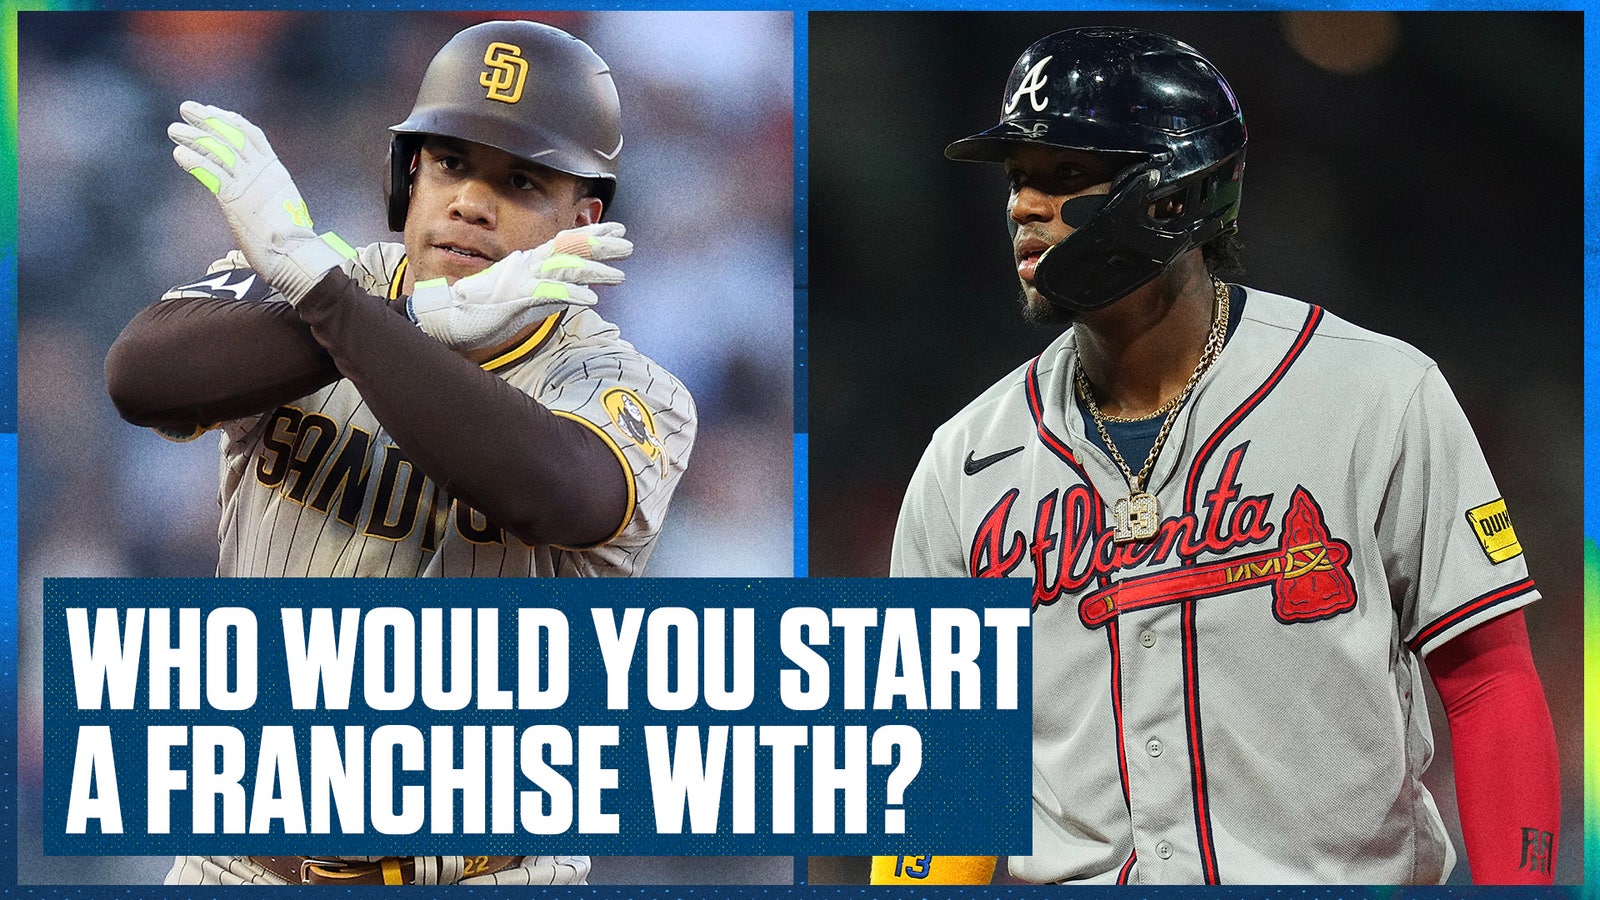 Who would you start a franchise with, Juan Soto or Ronald Acuña Jr.?